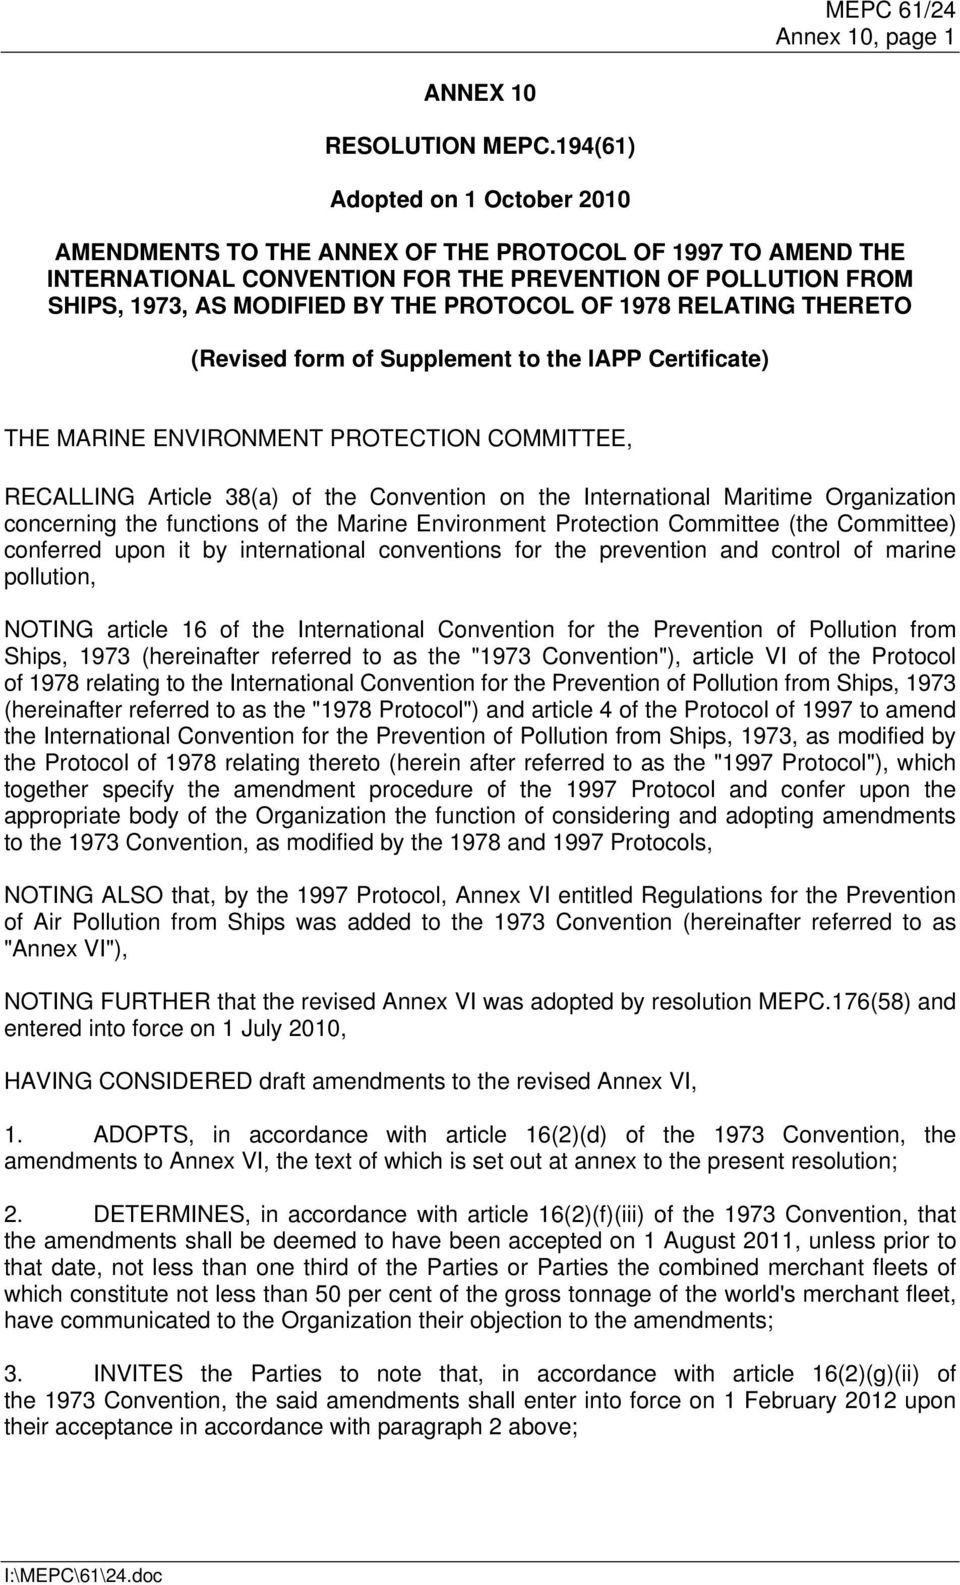 OF 1978 RELATING THERETO (Revised form of Supplement to the IAPP Certificate) THE MARINE ENVIRONMENT PROTECTION COMMITTEE, RECALLING Article 38(a) of the Convention on the International Maritime